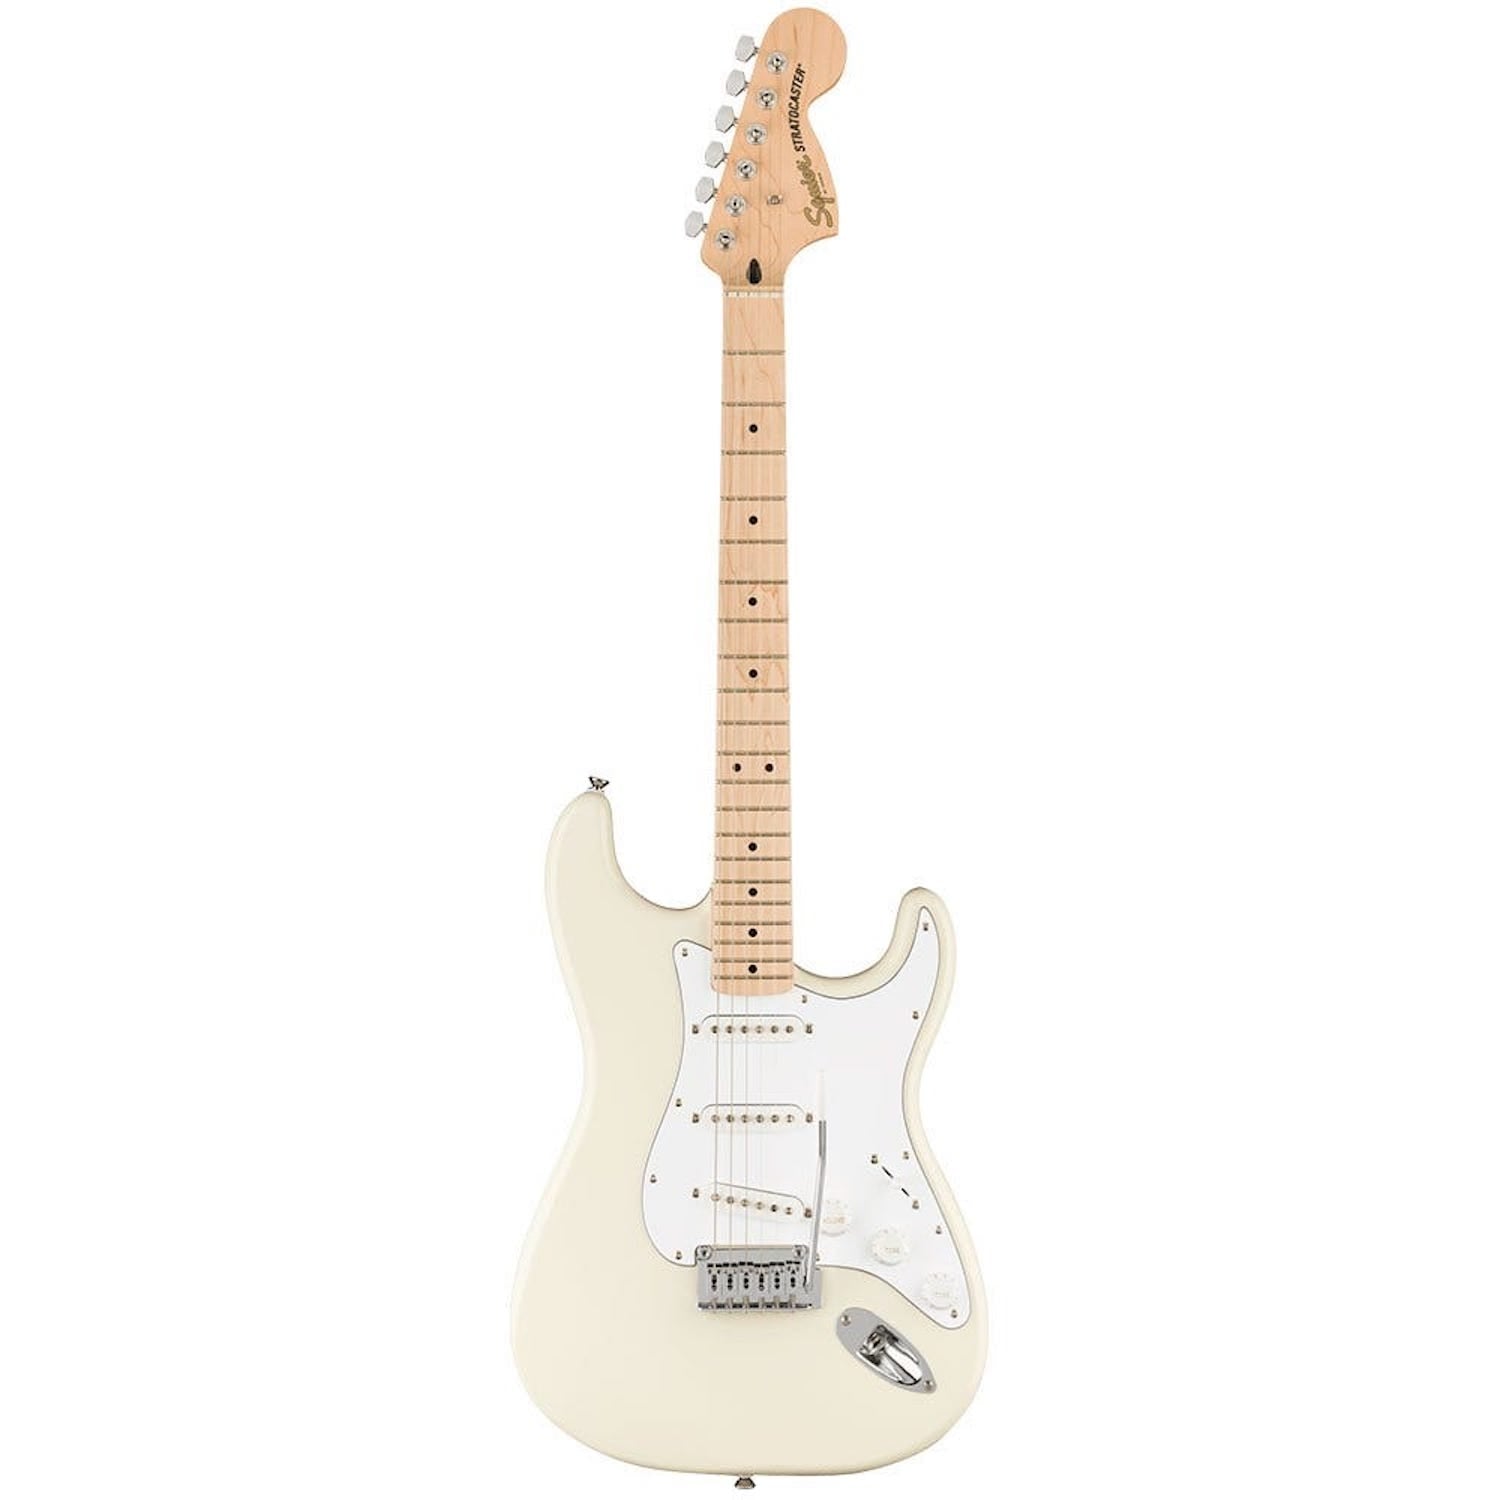 Squier Affinity Series™ Stratocaster®, Maple, Olympic White